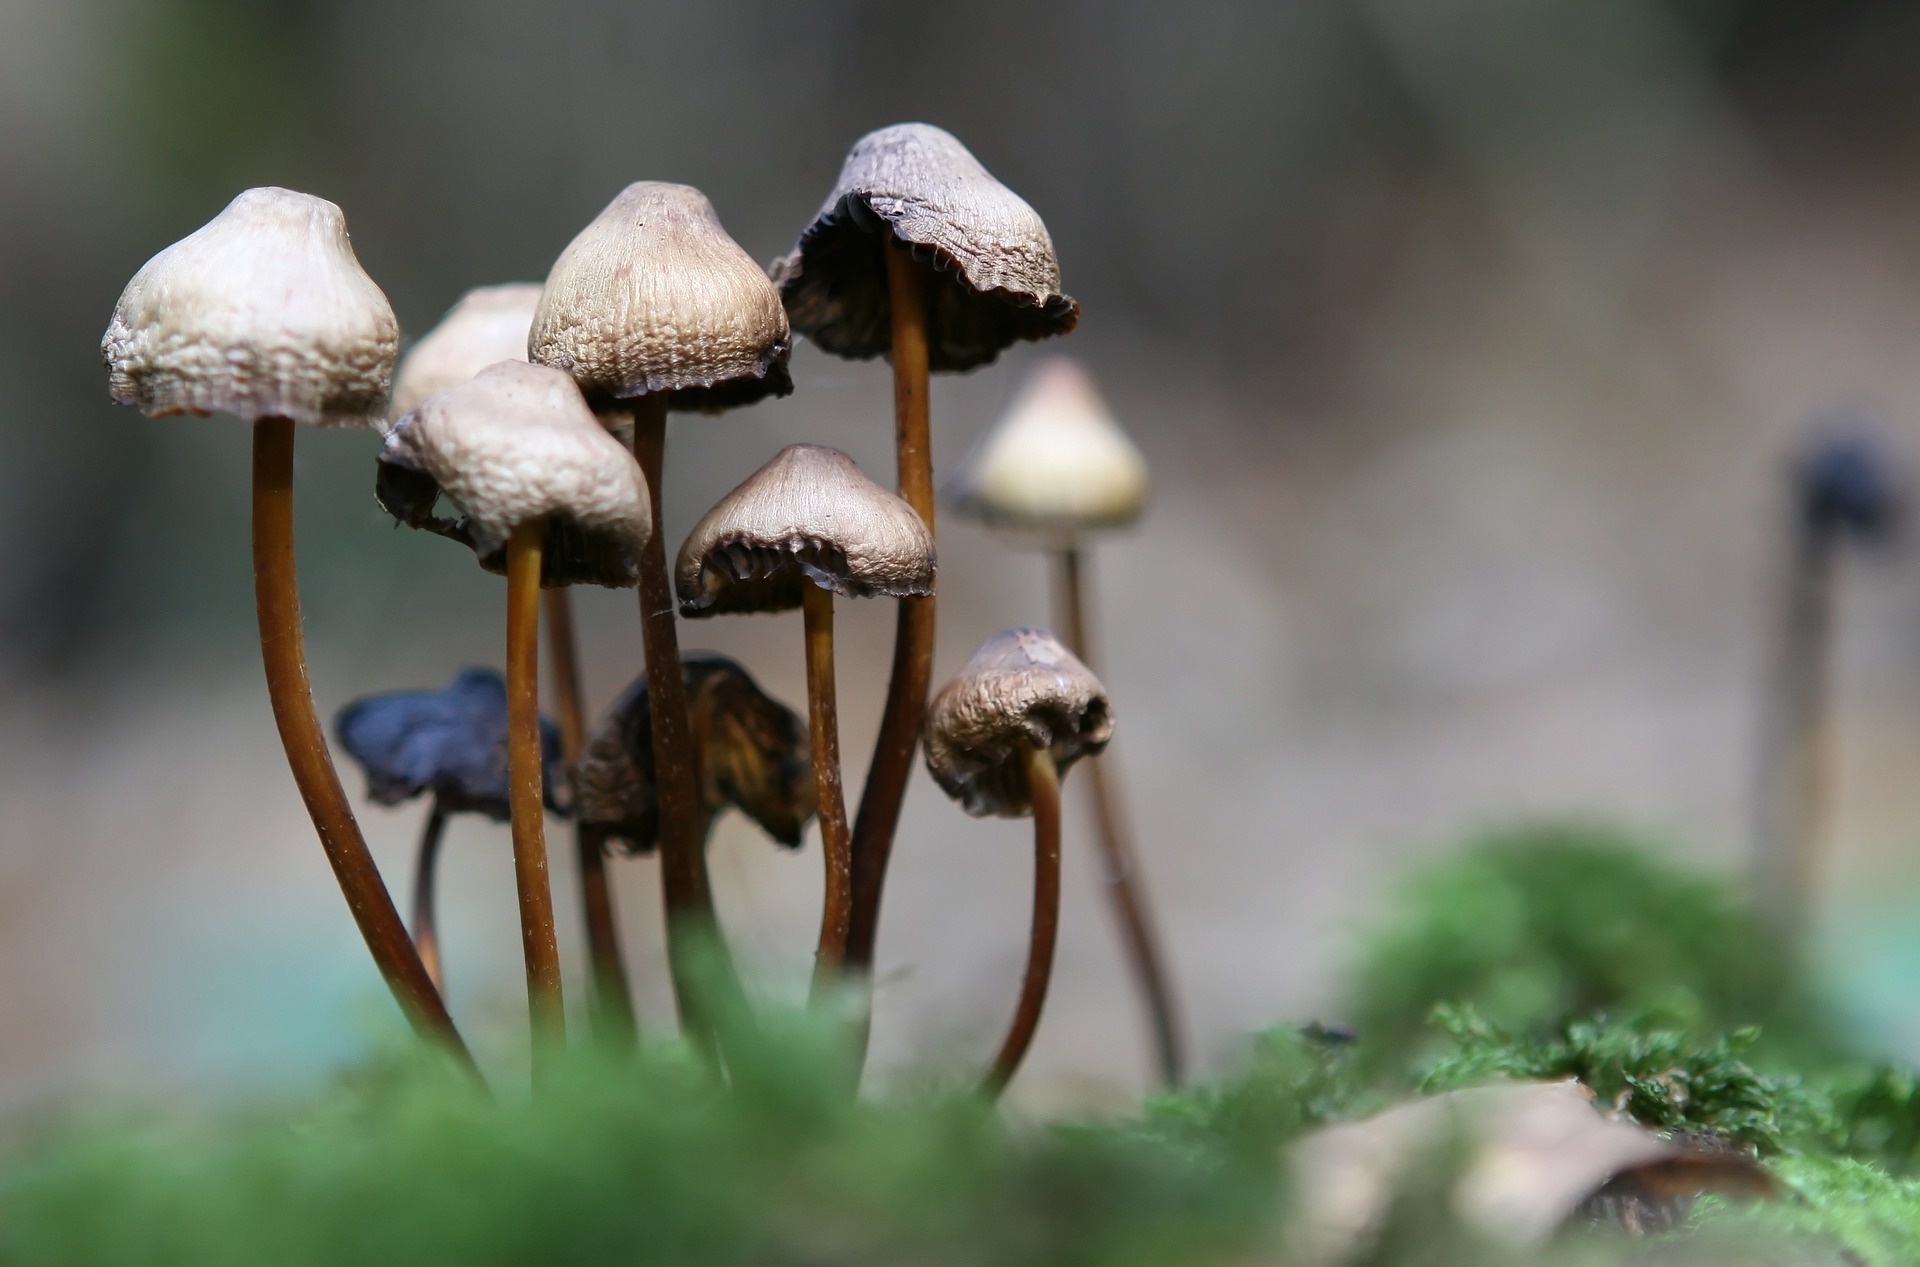 Magic mushrooms help cancer patients deal with depression